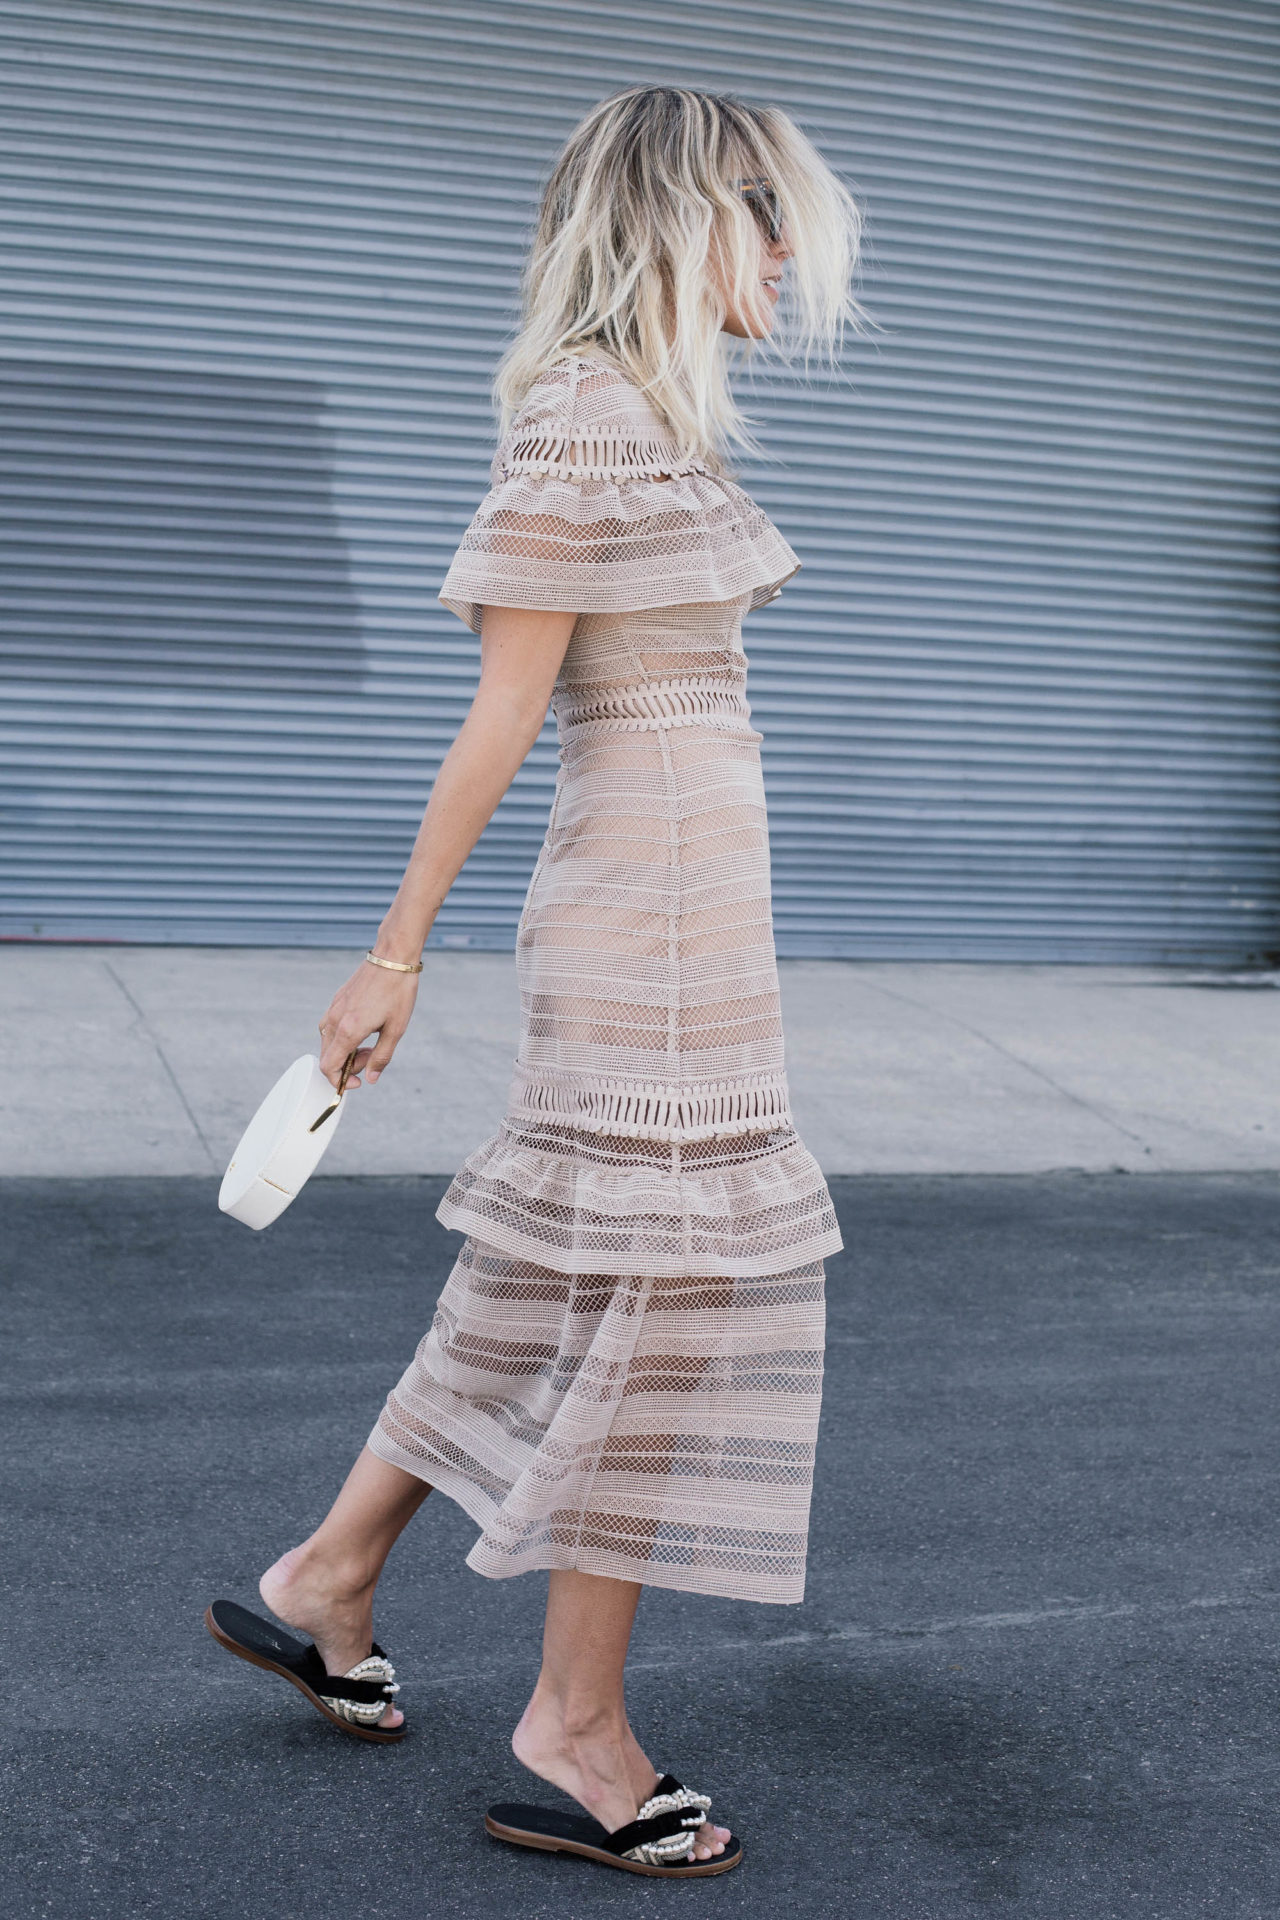 Nude Dresses and Evening Sandals - Damsel In Dior